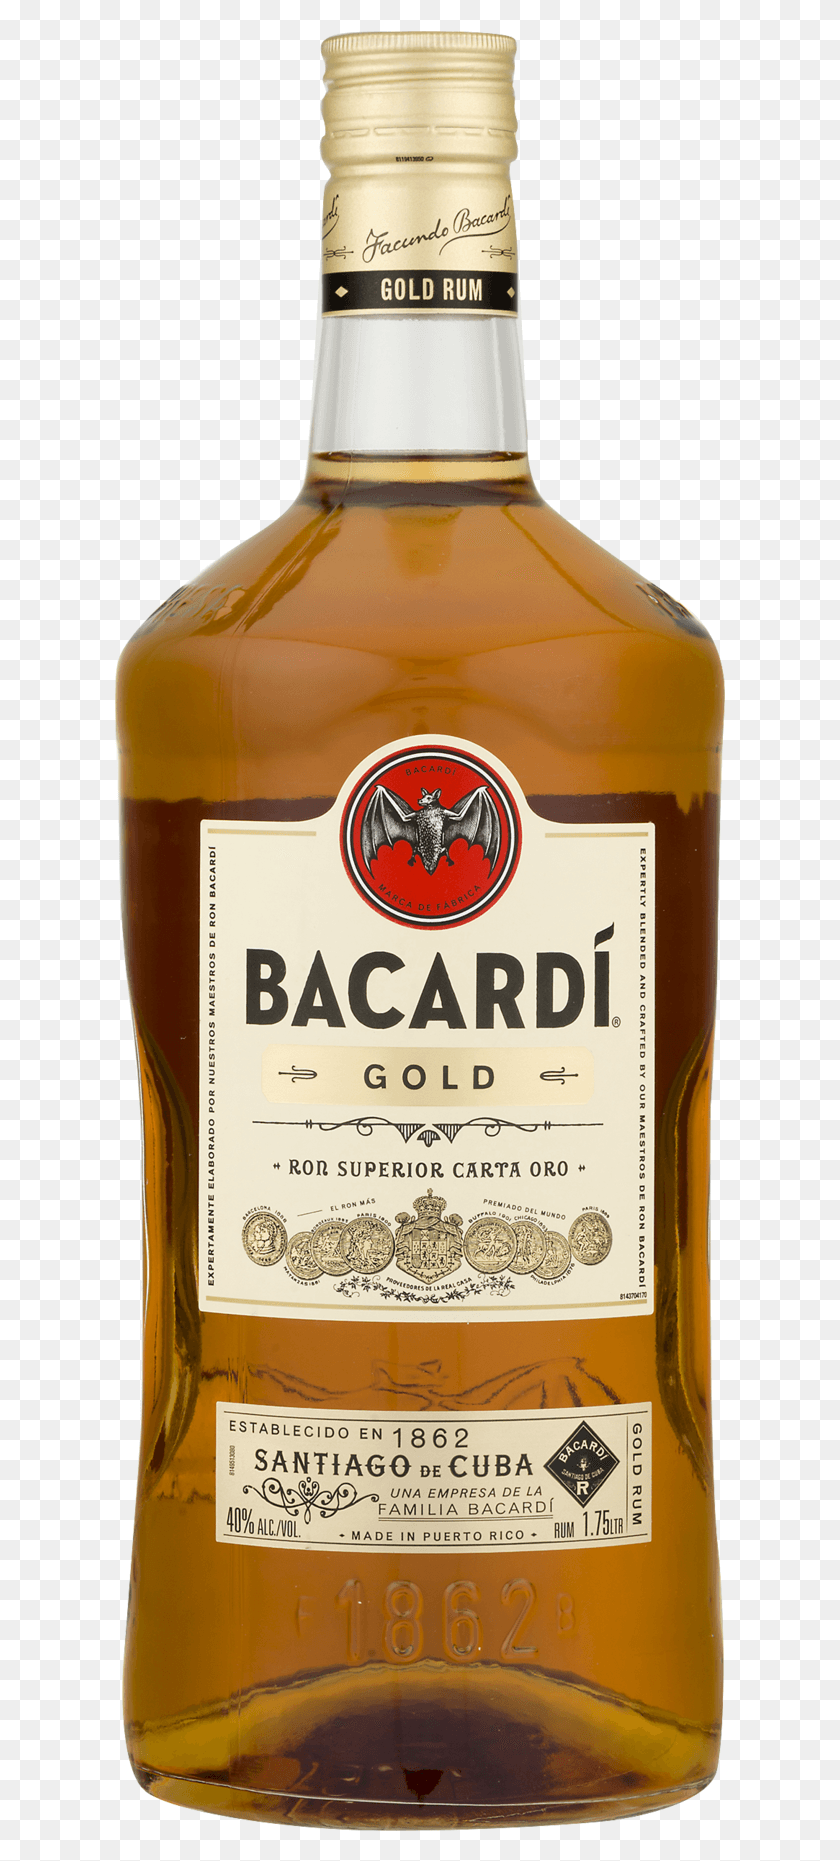 611x1801 Descargar Png Carstairs White Seal American Blended Whisky, Licor, Alcohol, Bebidas Hd Png